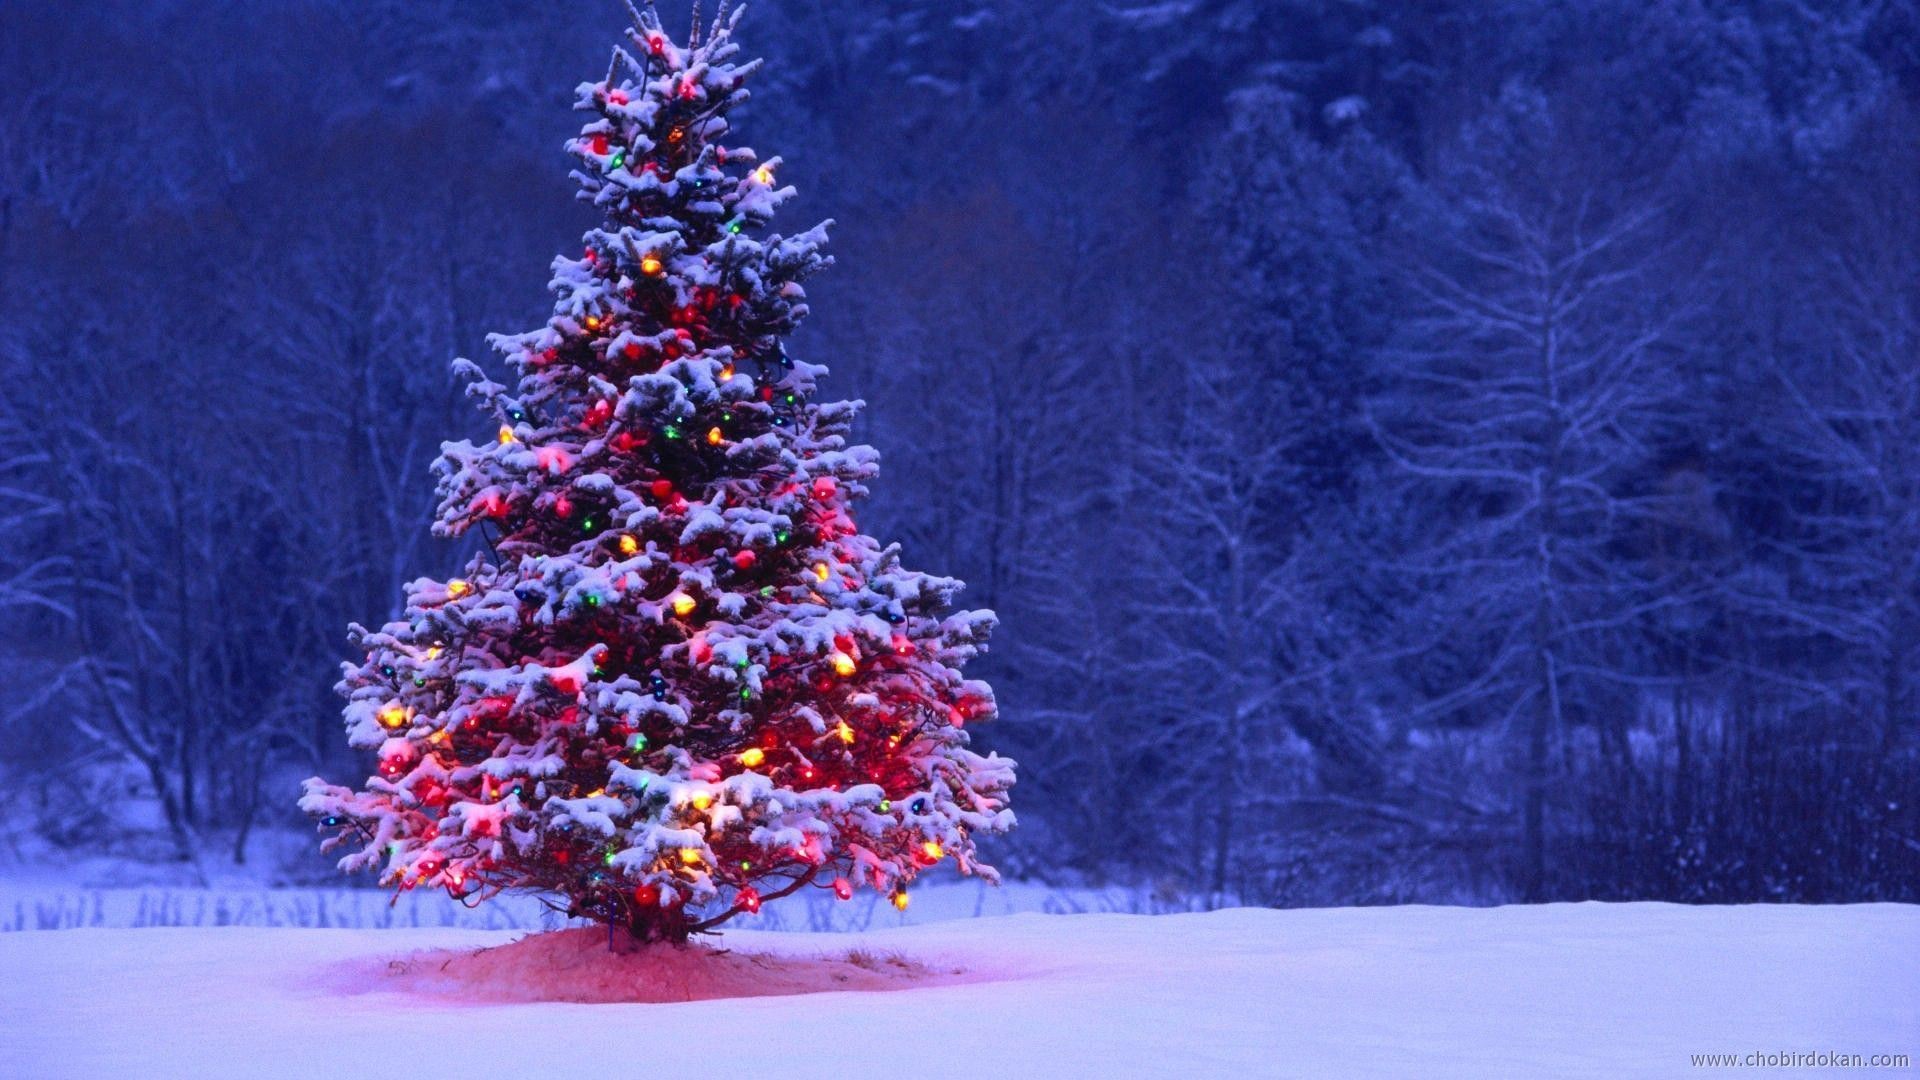 1920x1080 HQFX Christmas Photo Collection for Deskfor PC & Mac, Laptop, Tablet,  Mobile Phone